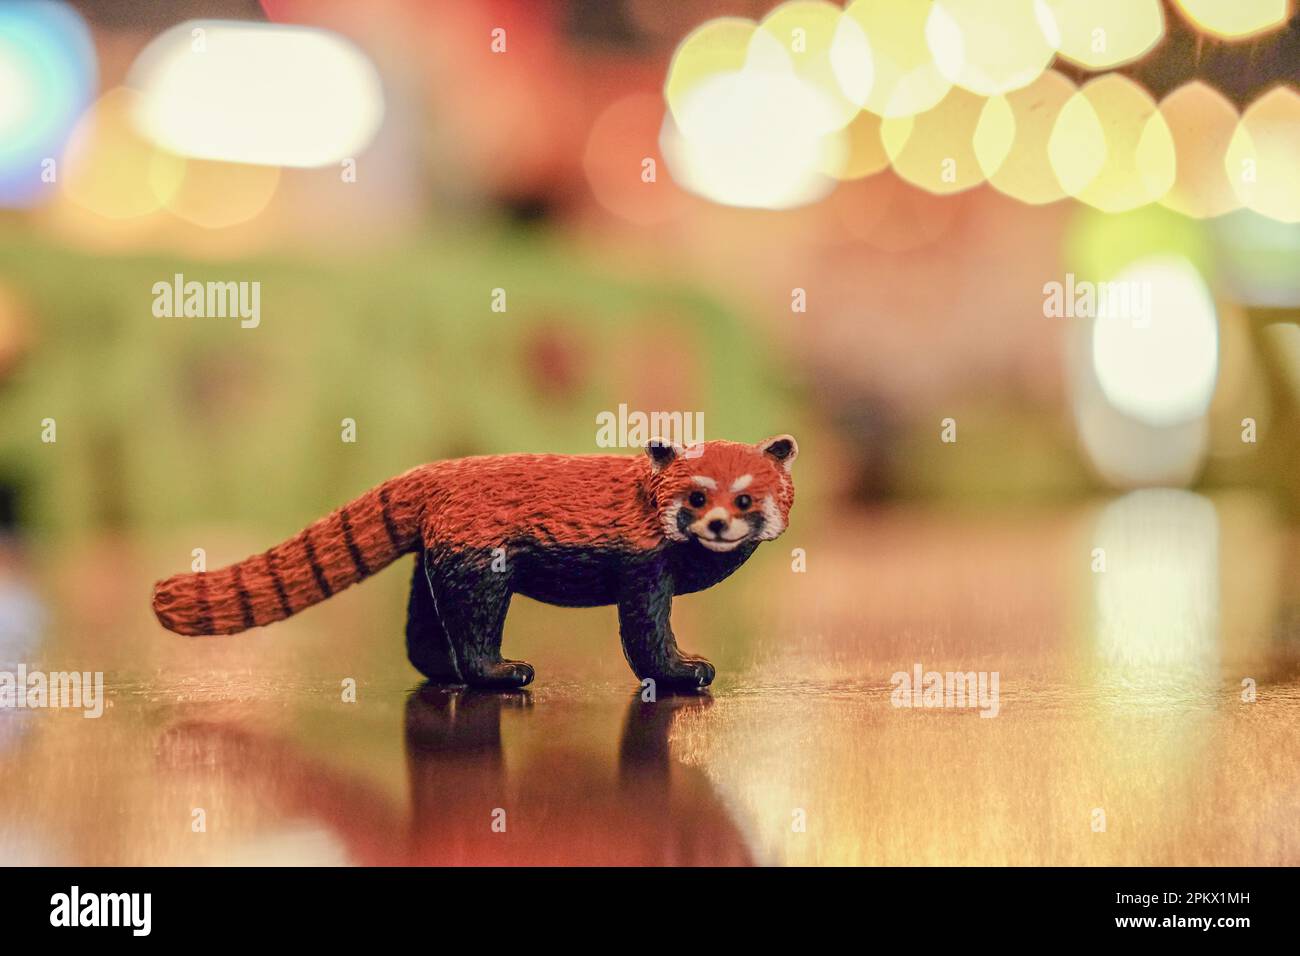 Red panda toy animal in a dim room on a table with bokeh background Stock Photo